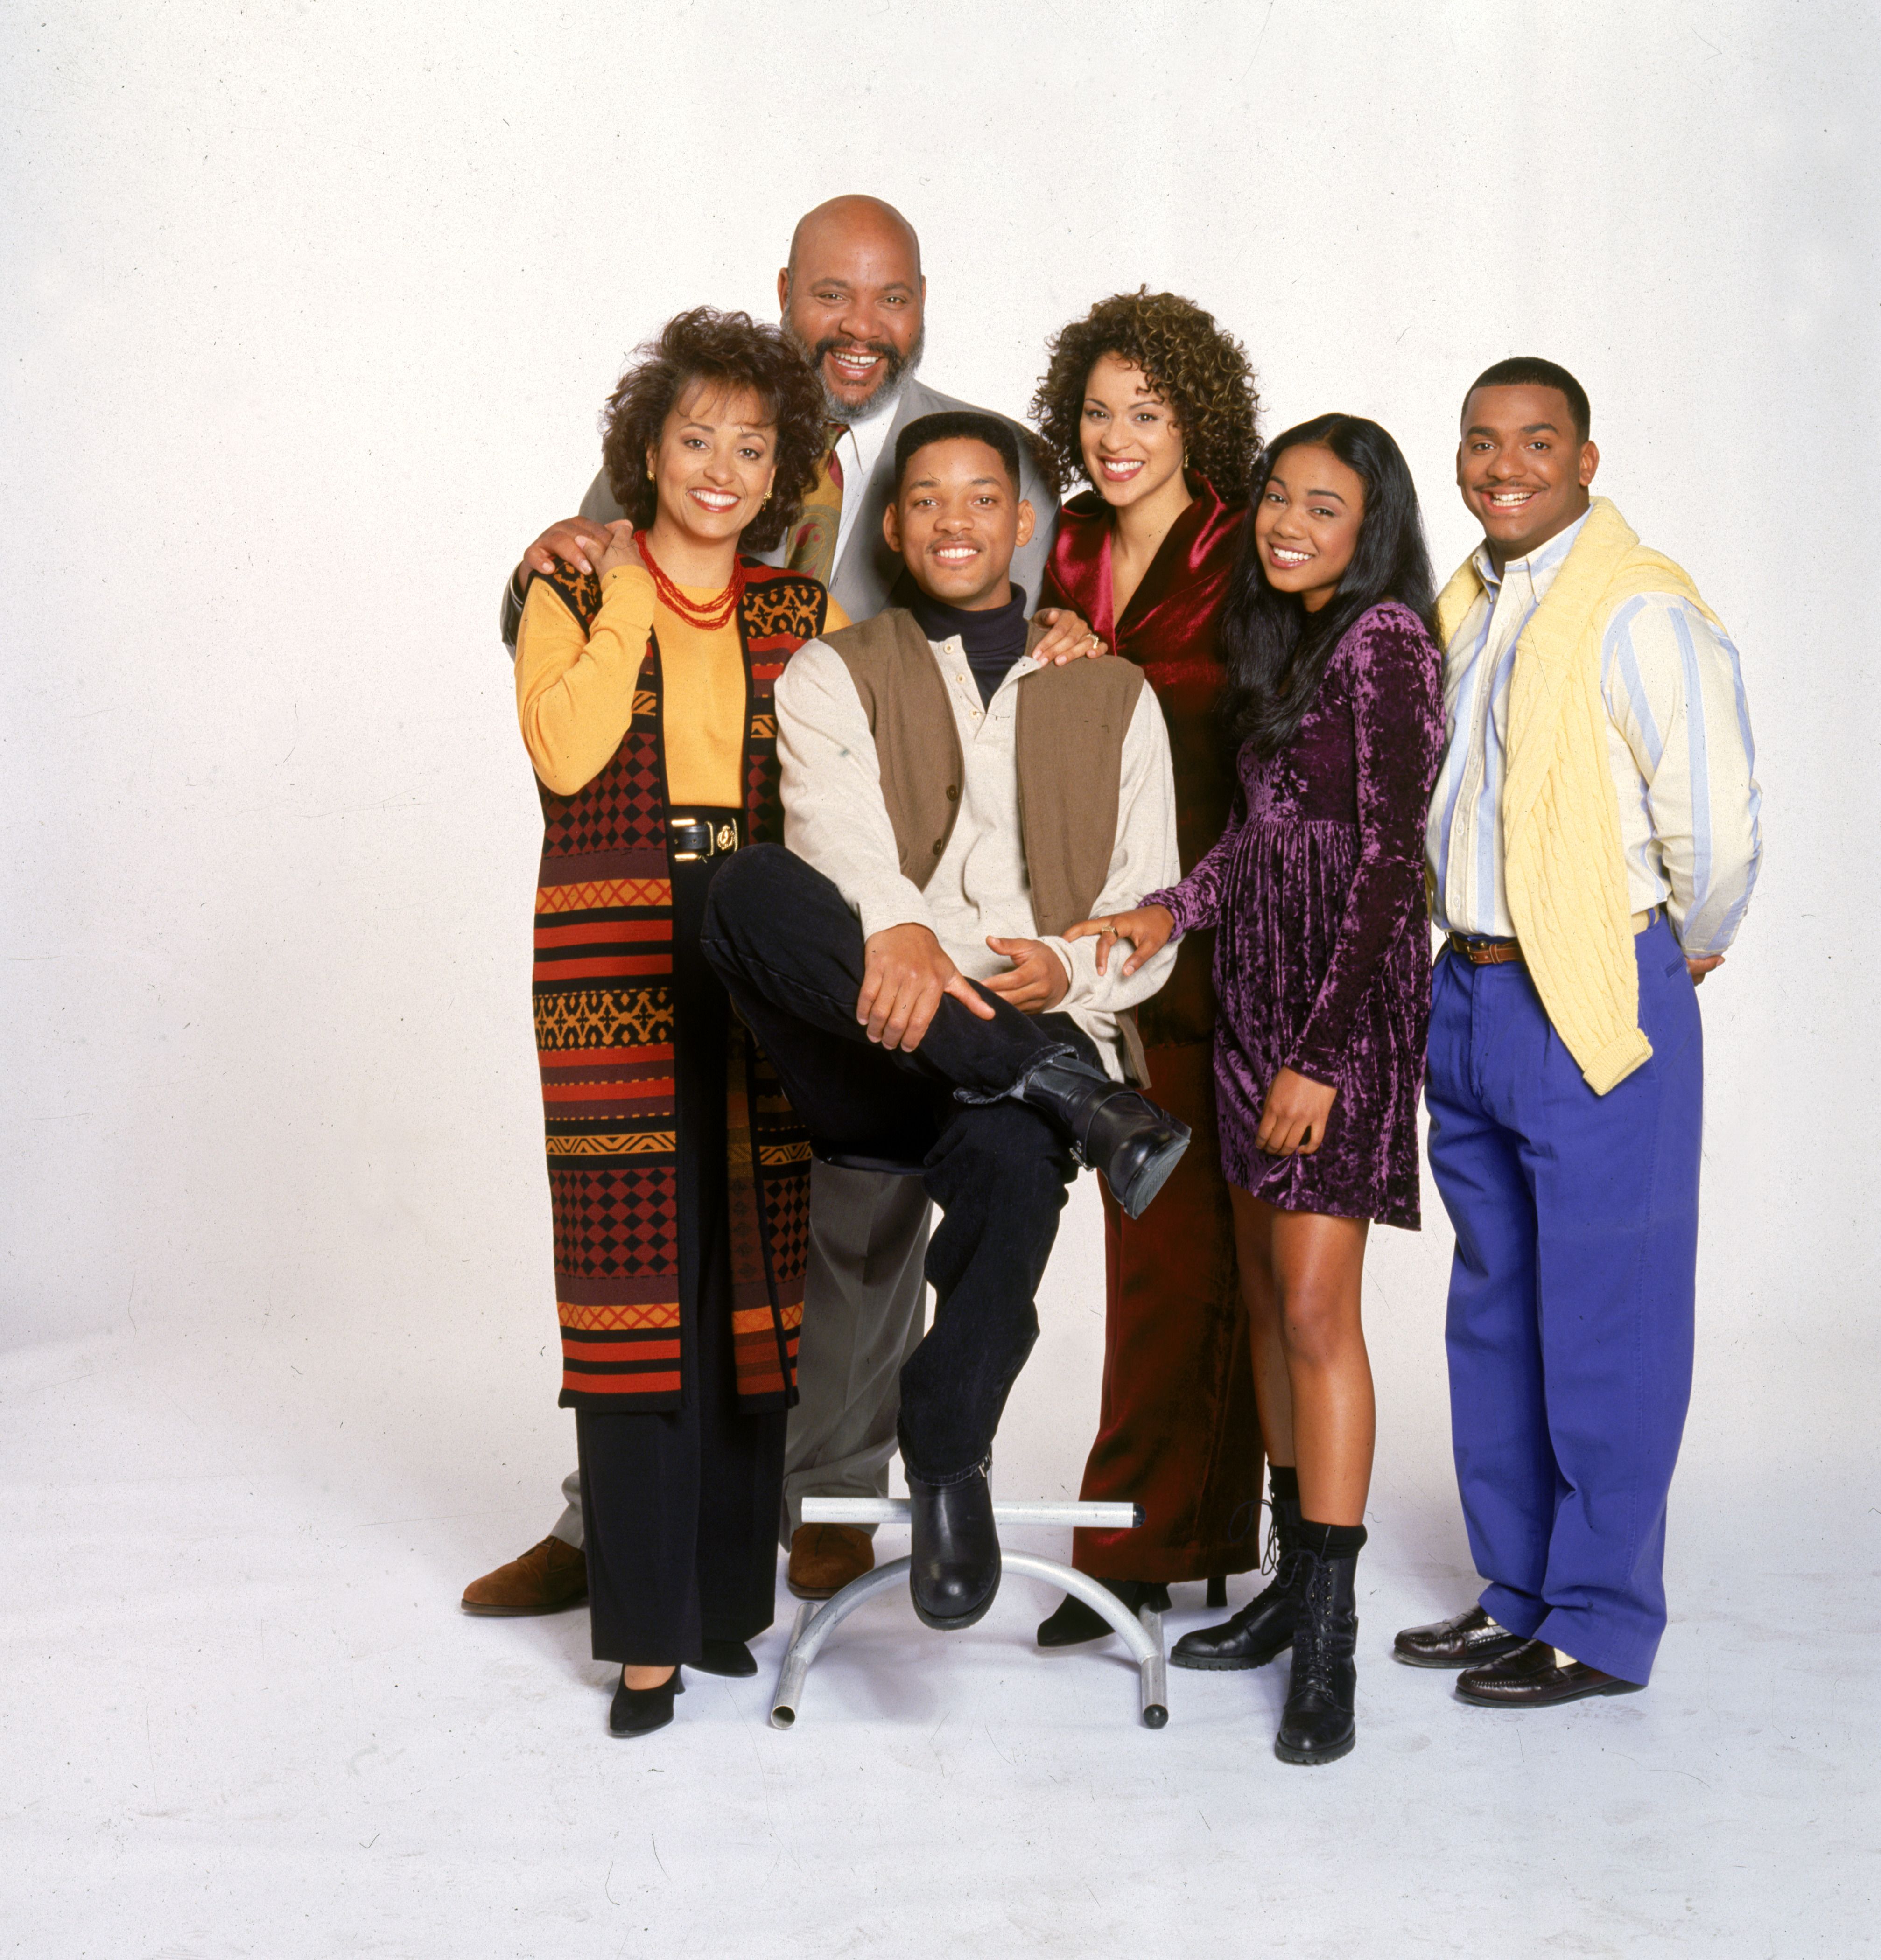 Fresh Prince of Bel-Air: Best fashion from the original series